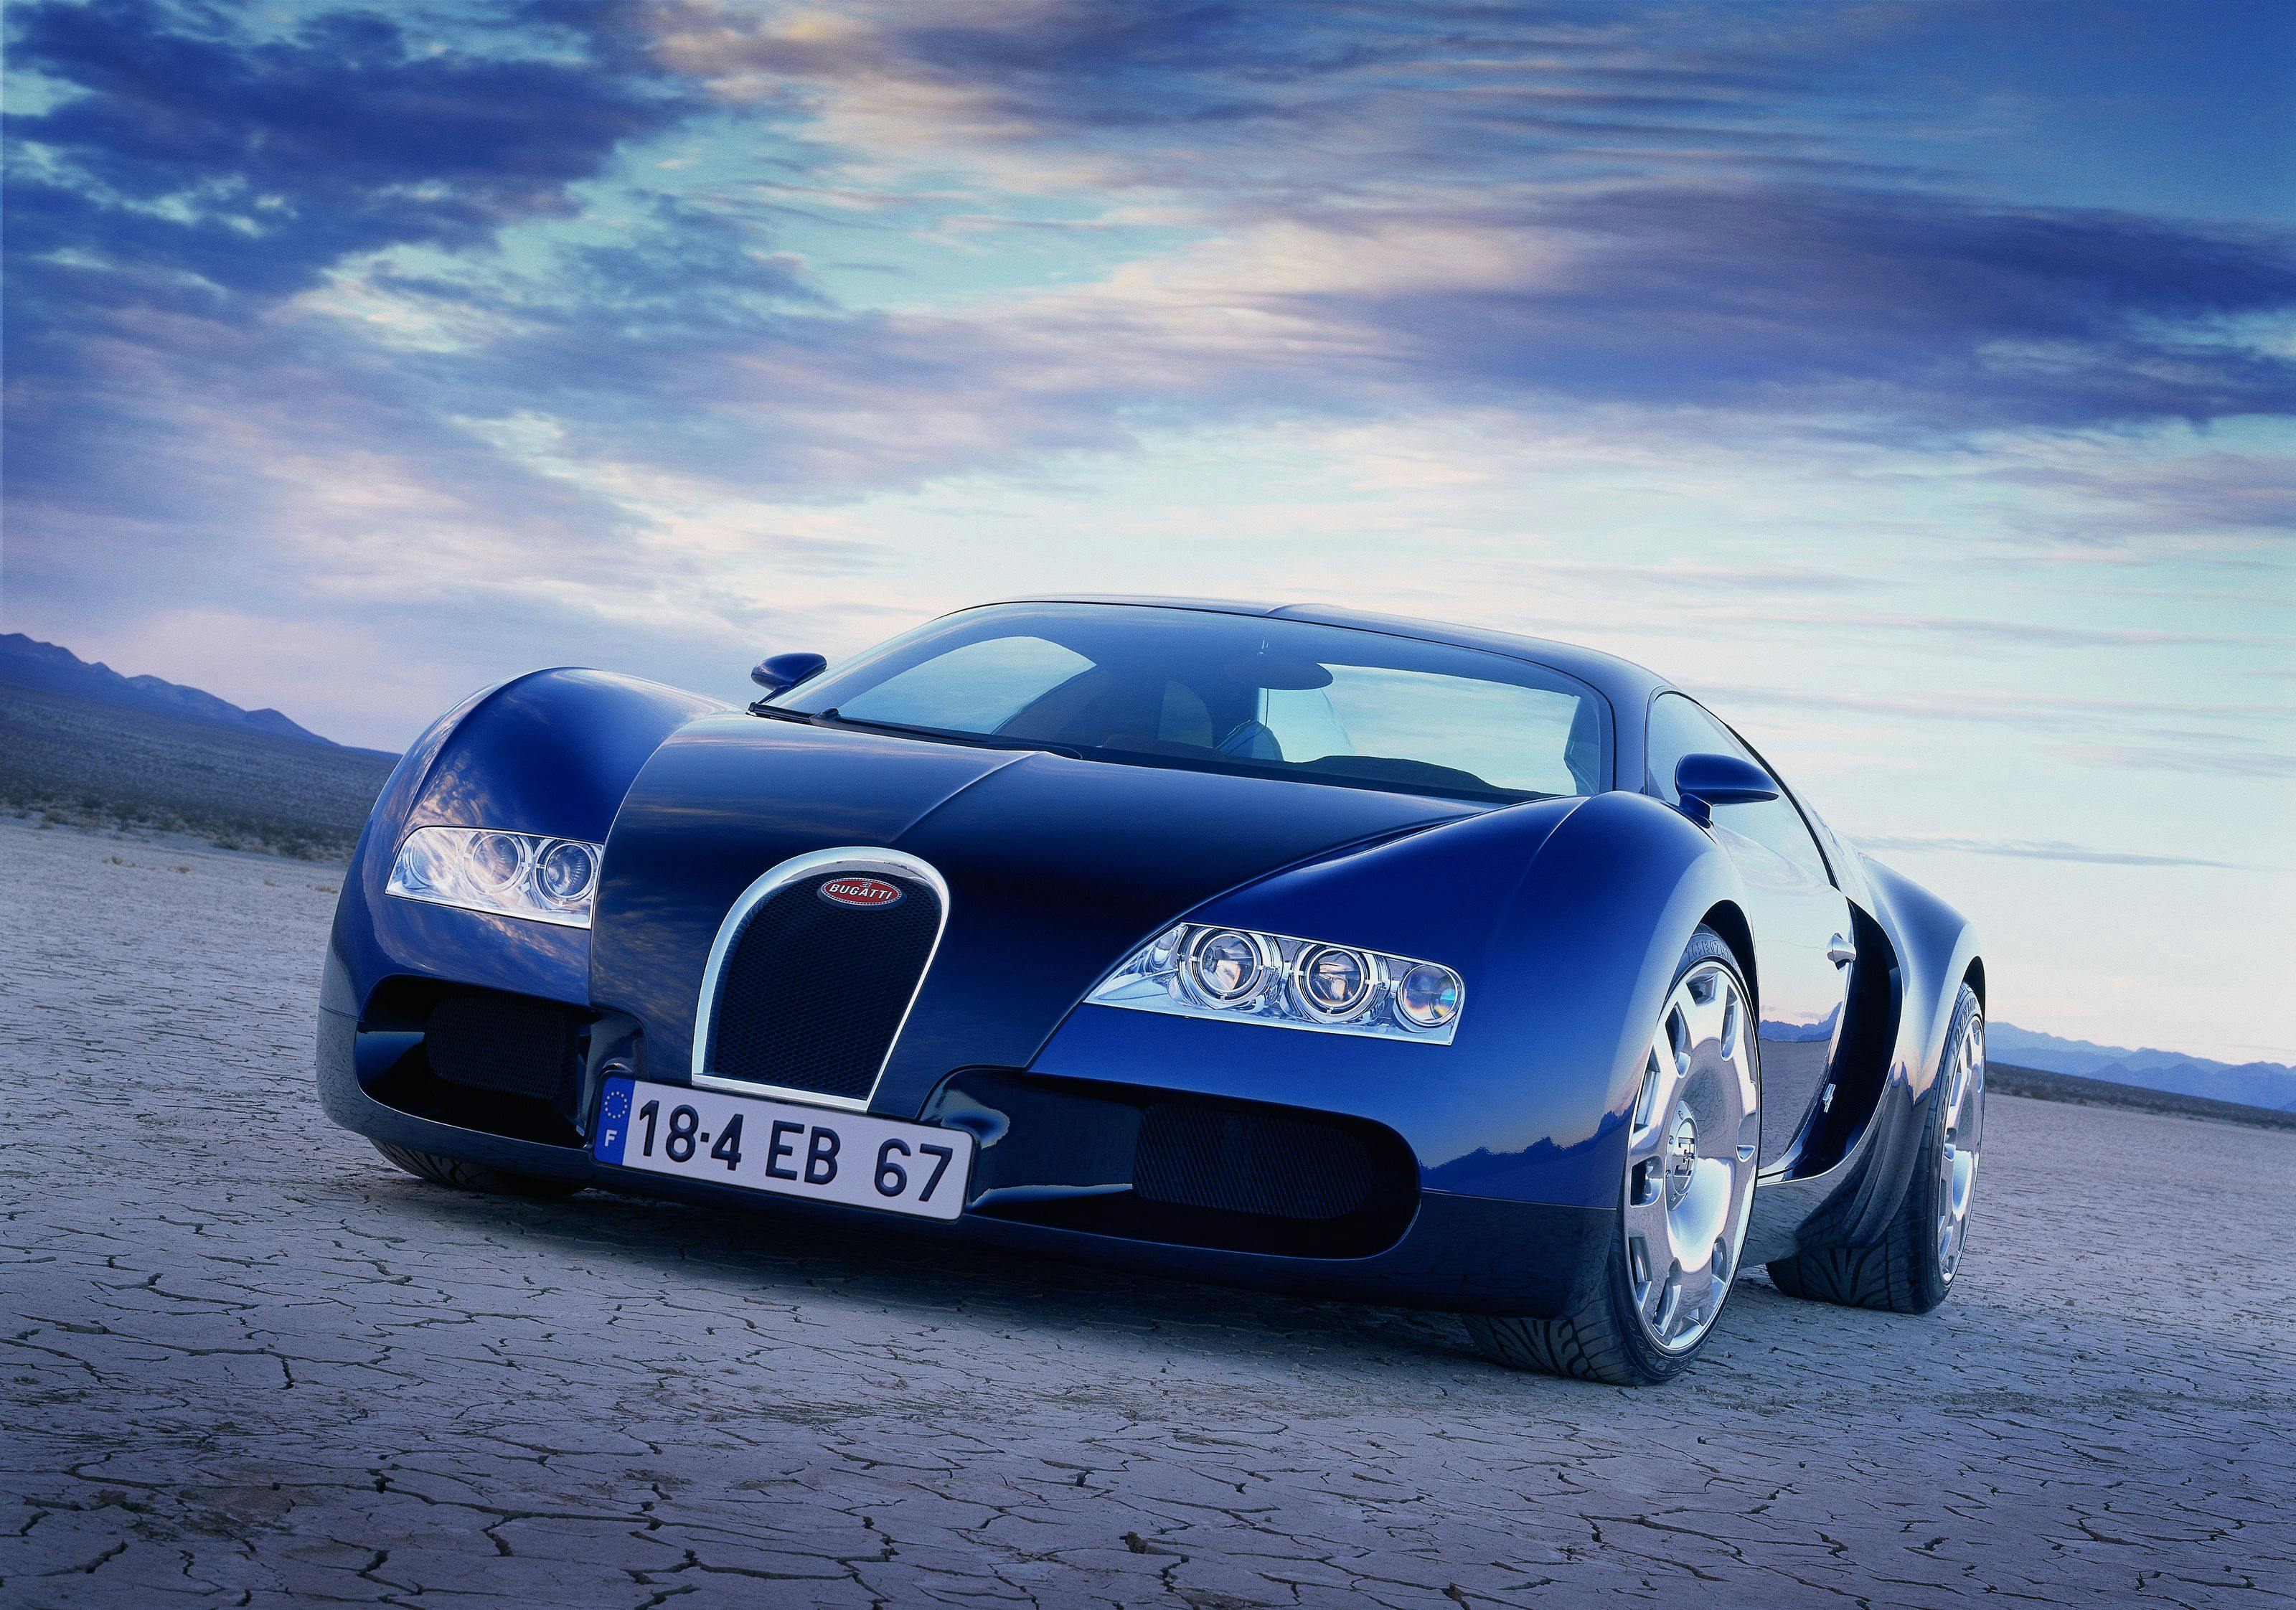 Bugatti at Rétromobile 2014: paying tribute to the Veyron